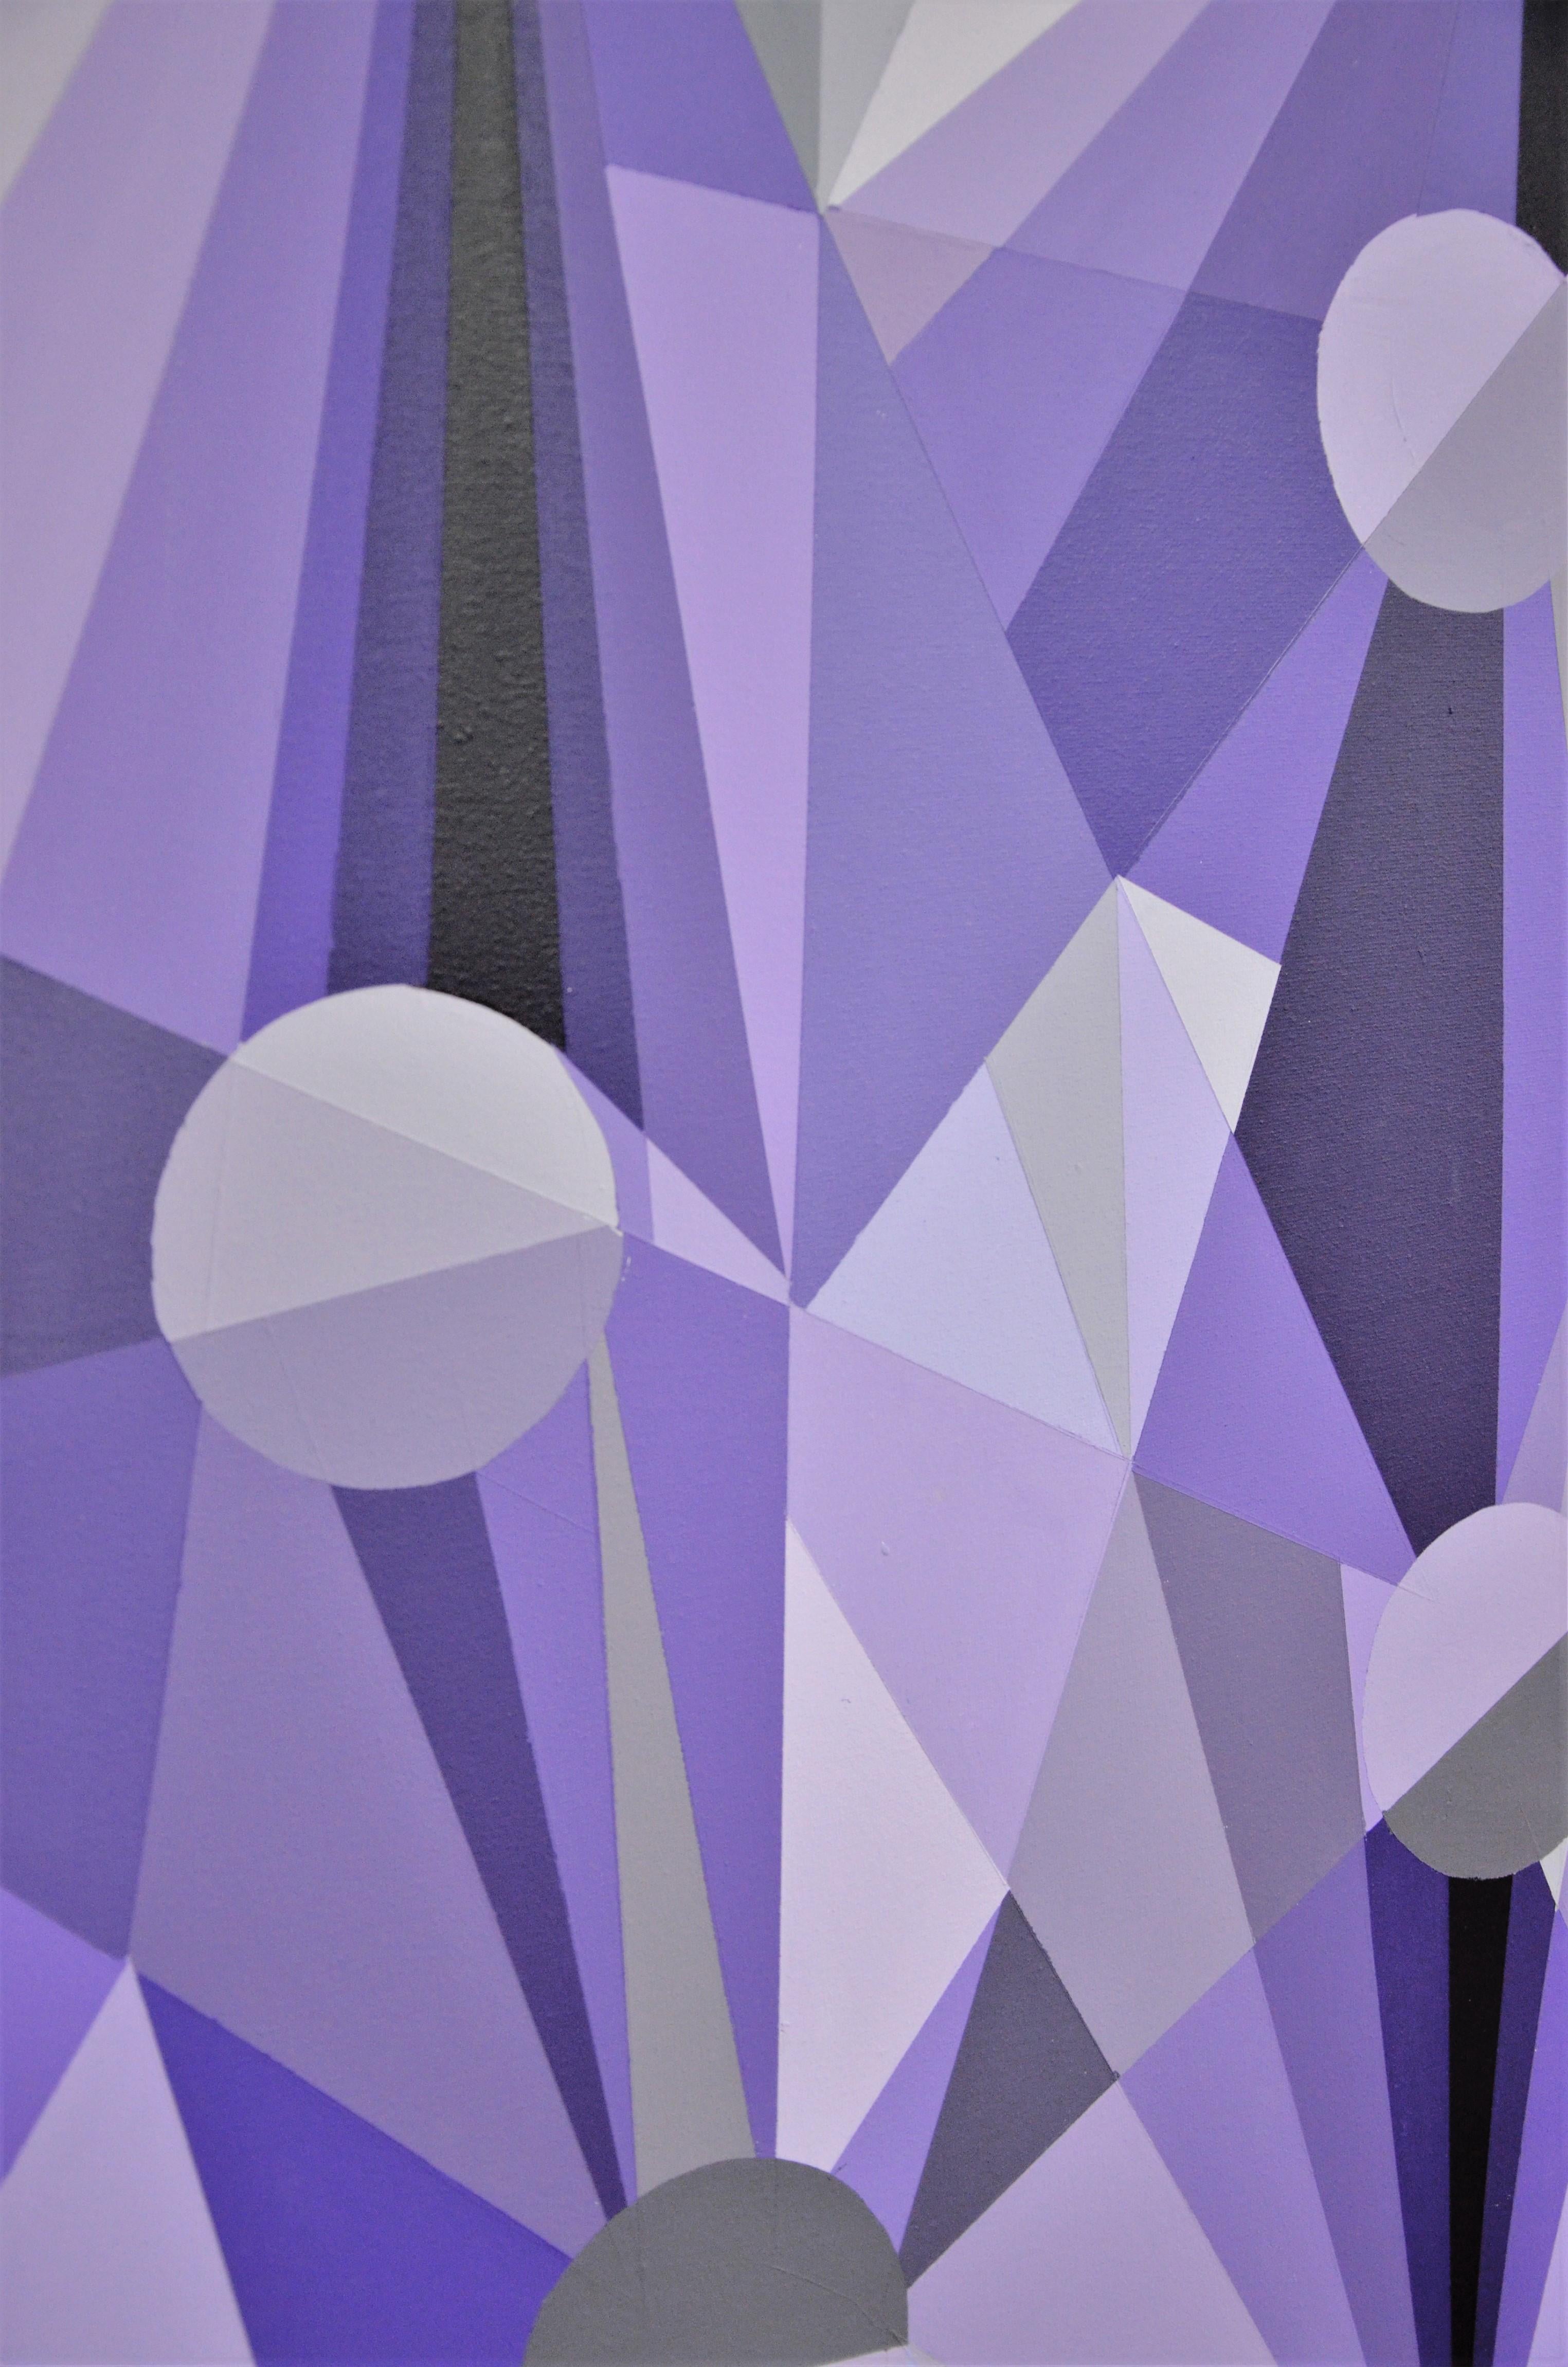 Drops of Amethyst by Edward Granger, Represented by Tuleste Factory 3